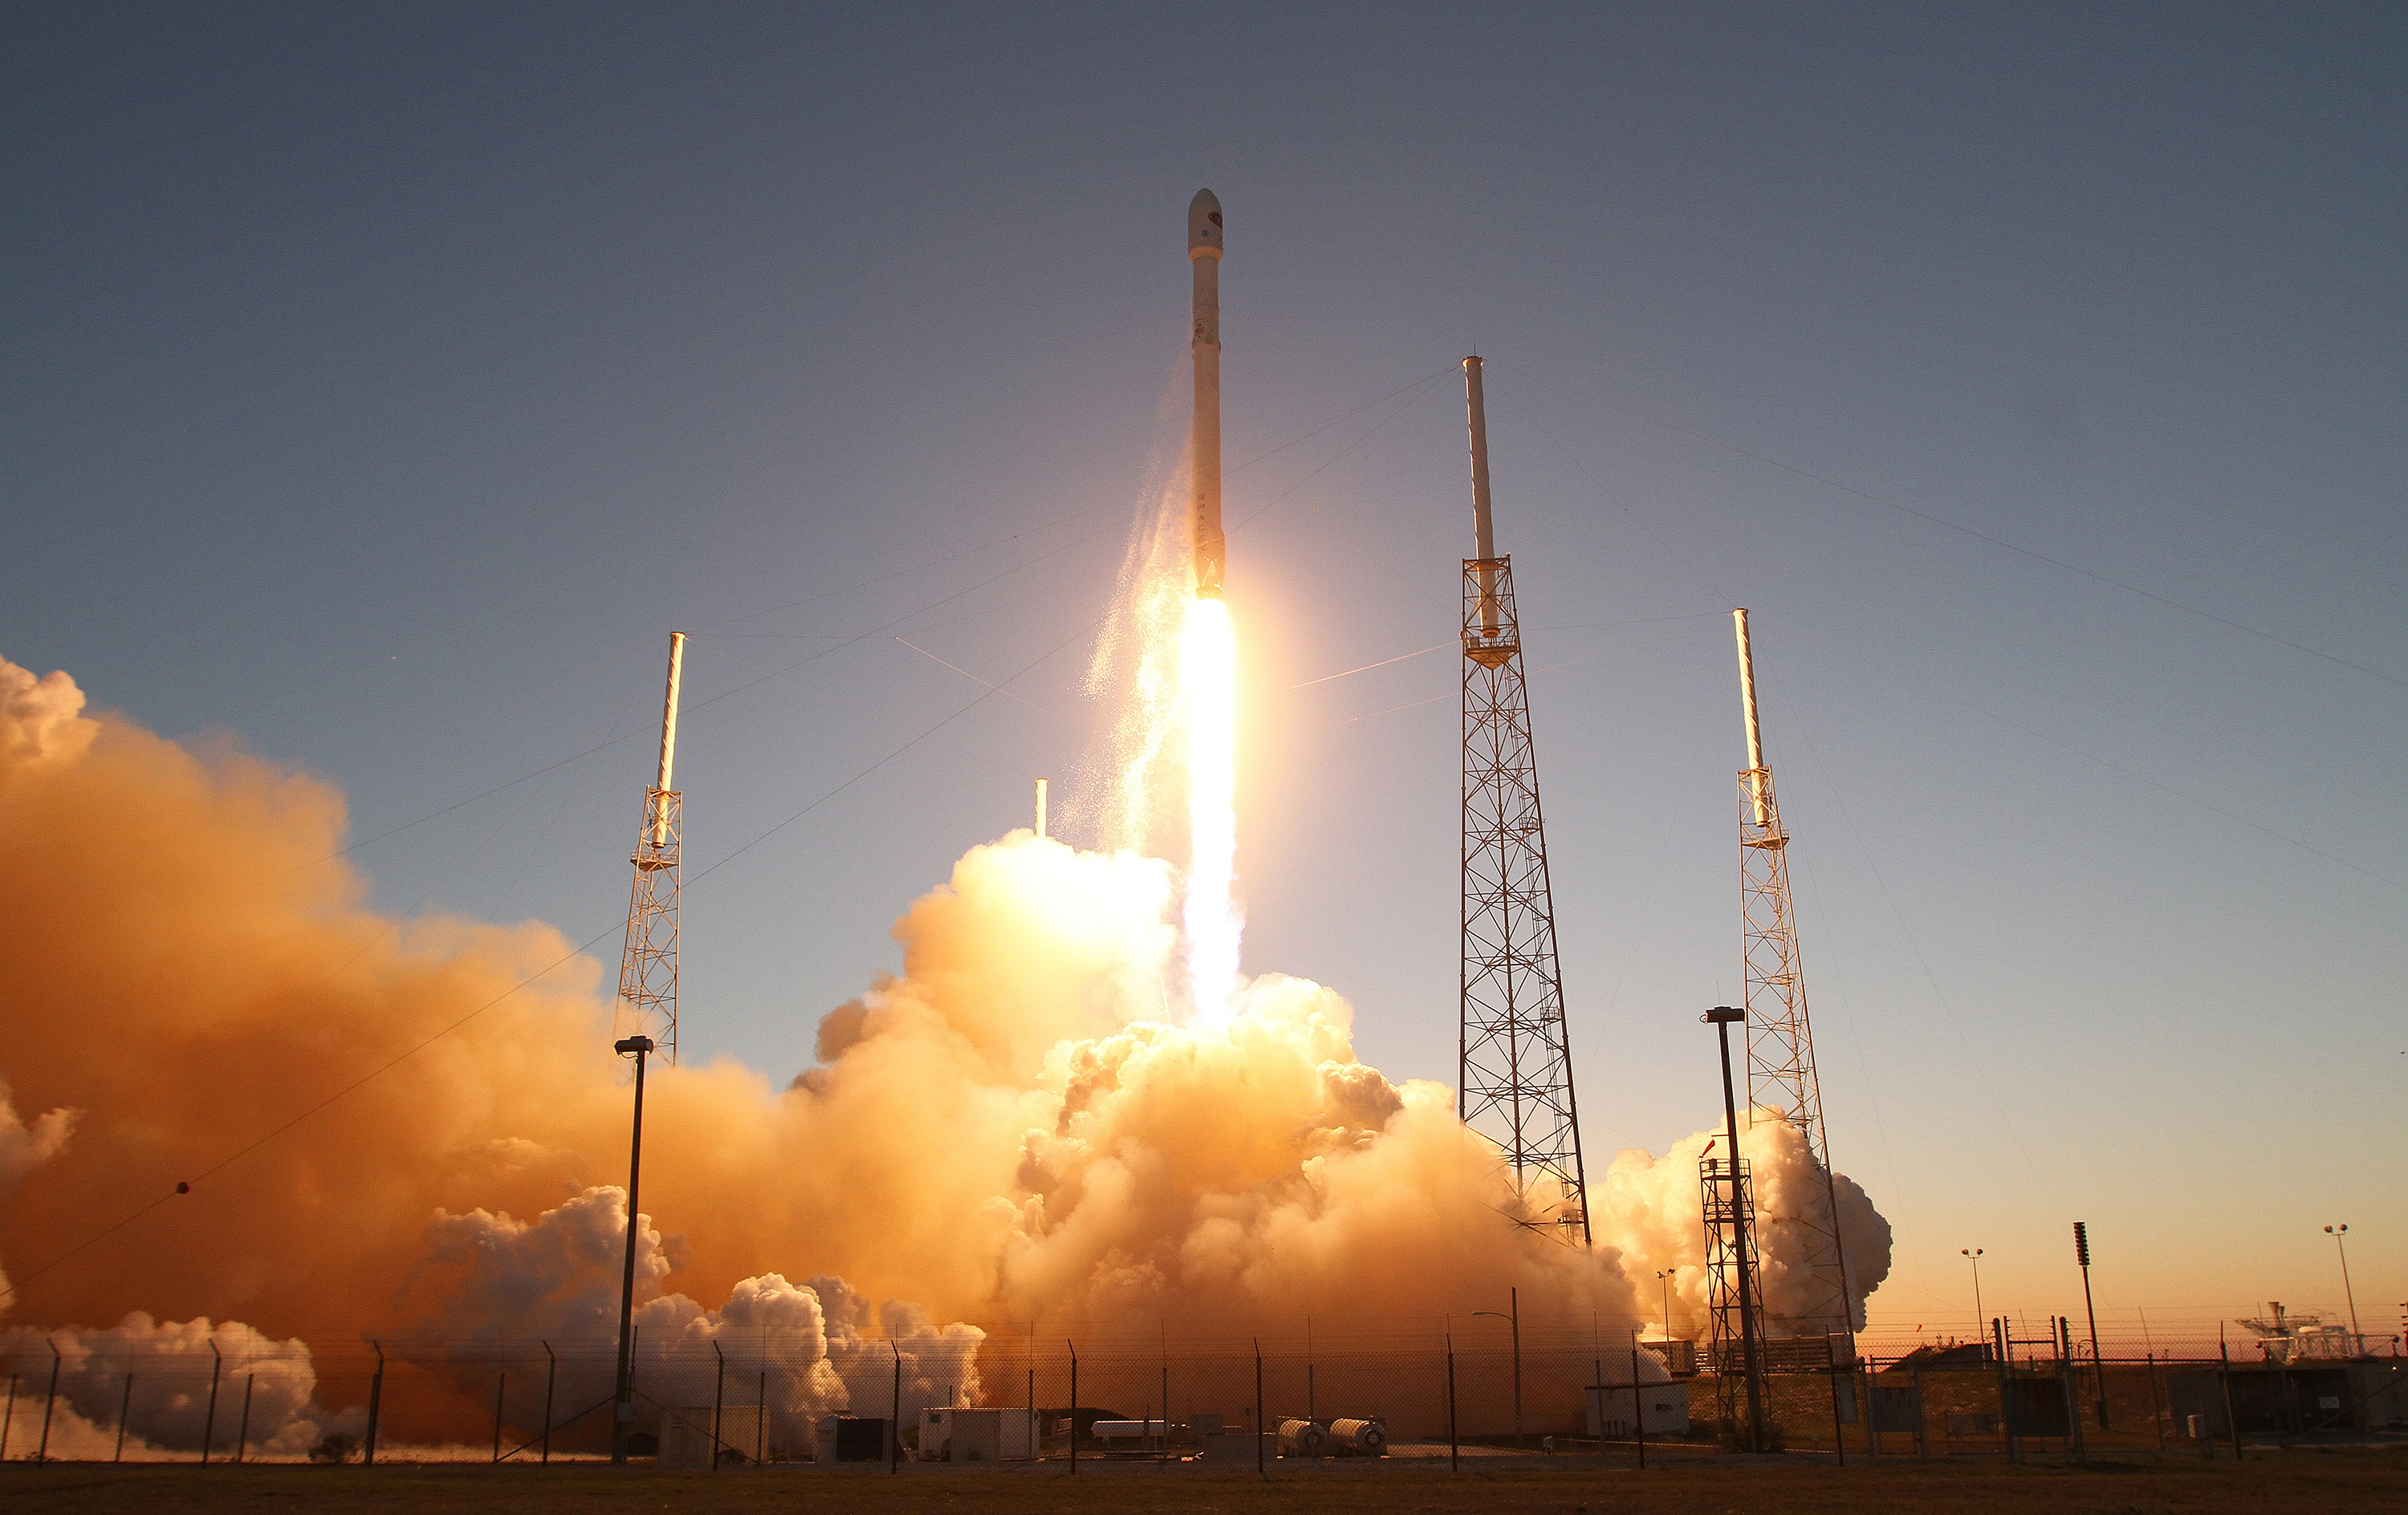 A SpaceX Falcon9 rocket blasts off the launch pad on Feb. 11, 2015. ((Red Huber/Orlando Sentinel/TNS via Getty Images))